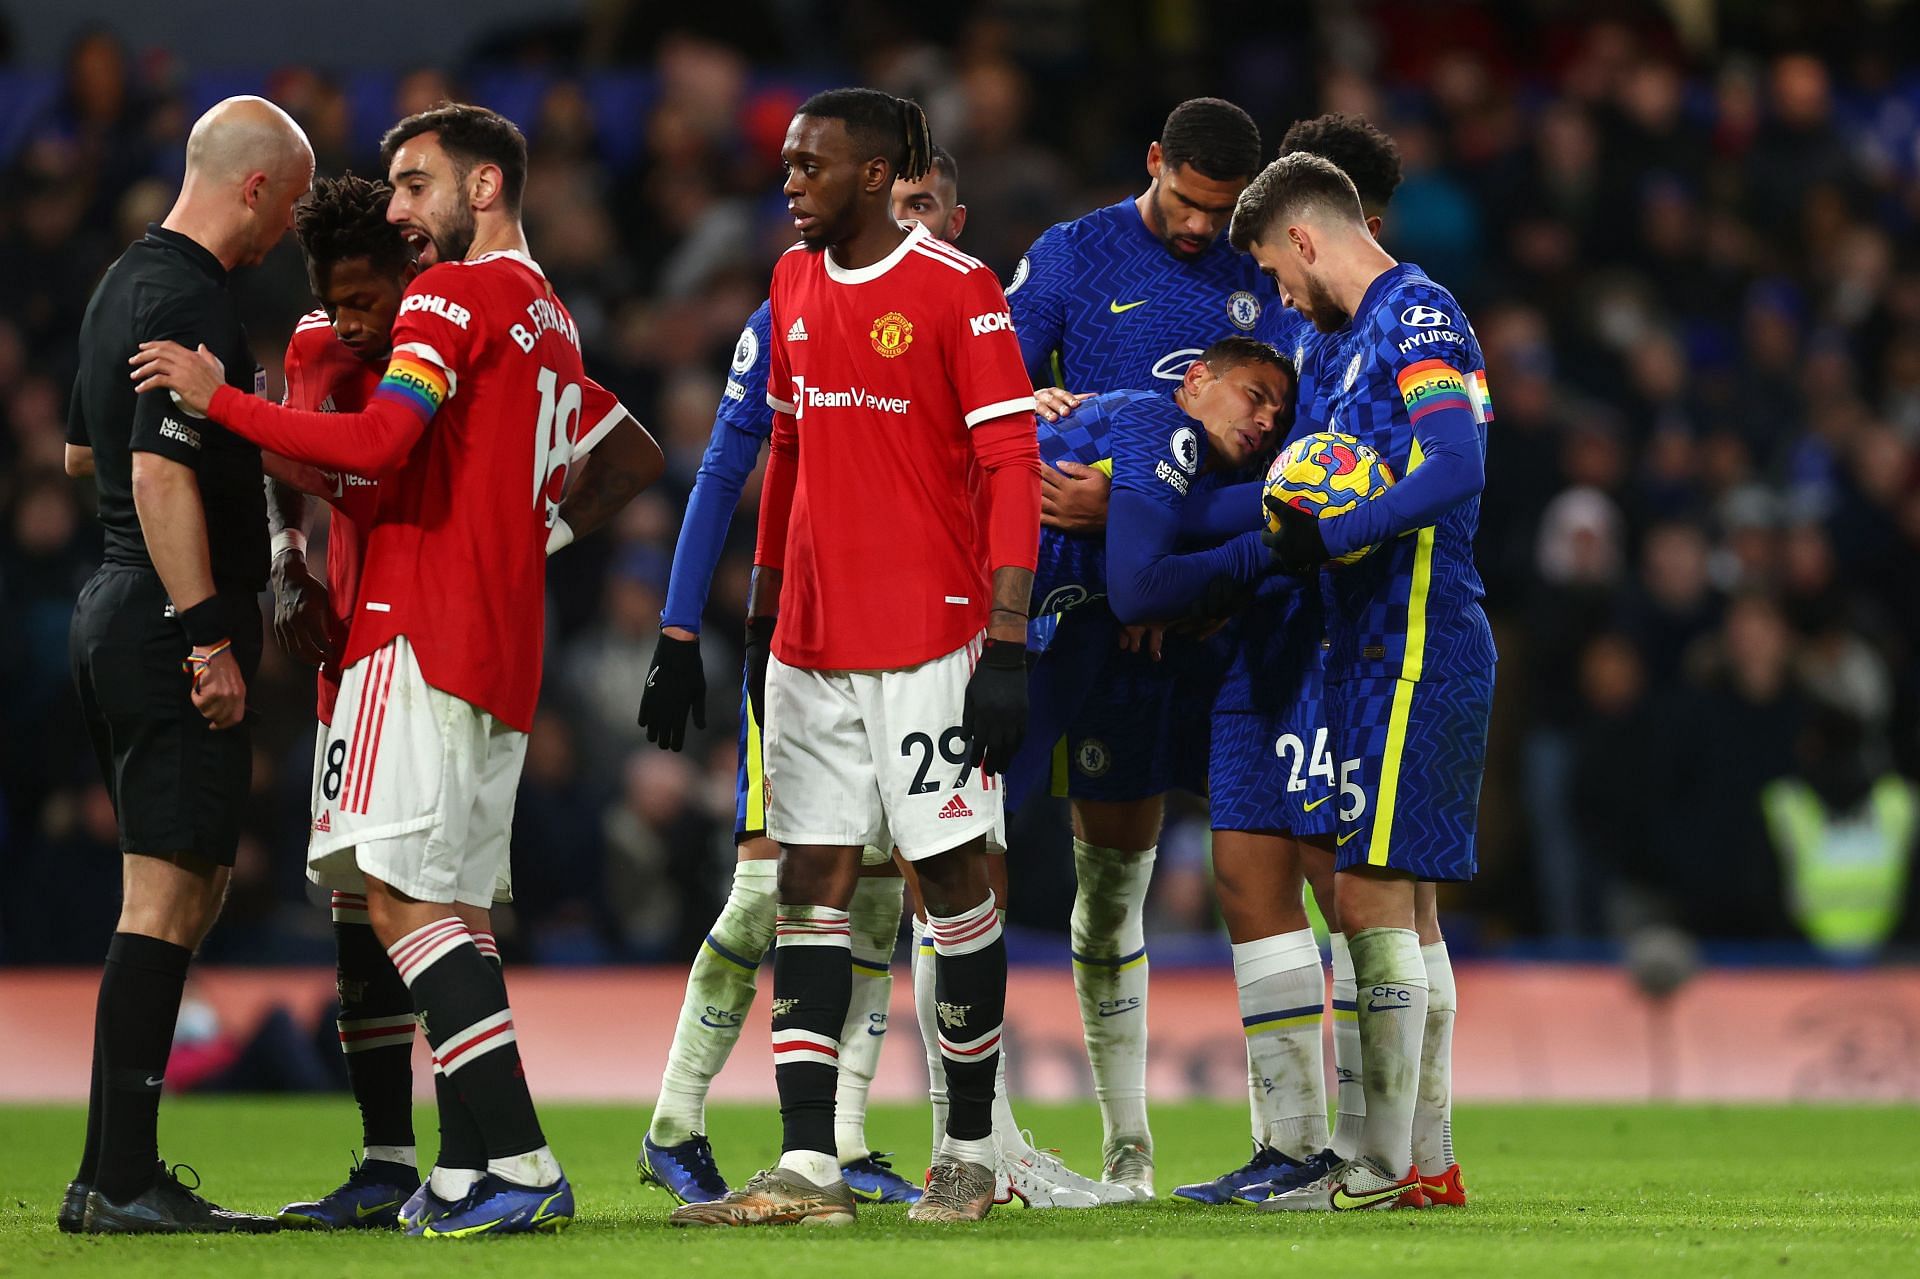 Chelsea and Manchester United played out a 1-1 draw on Sunday